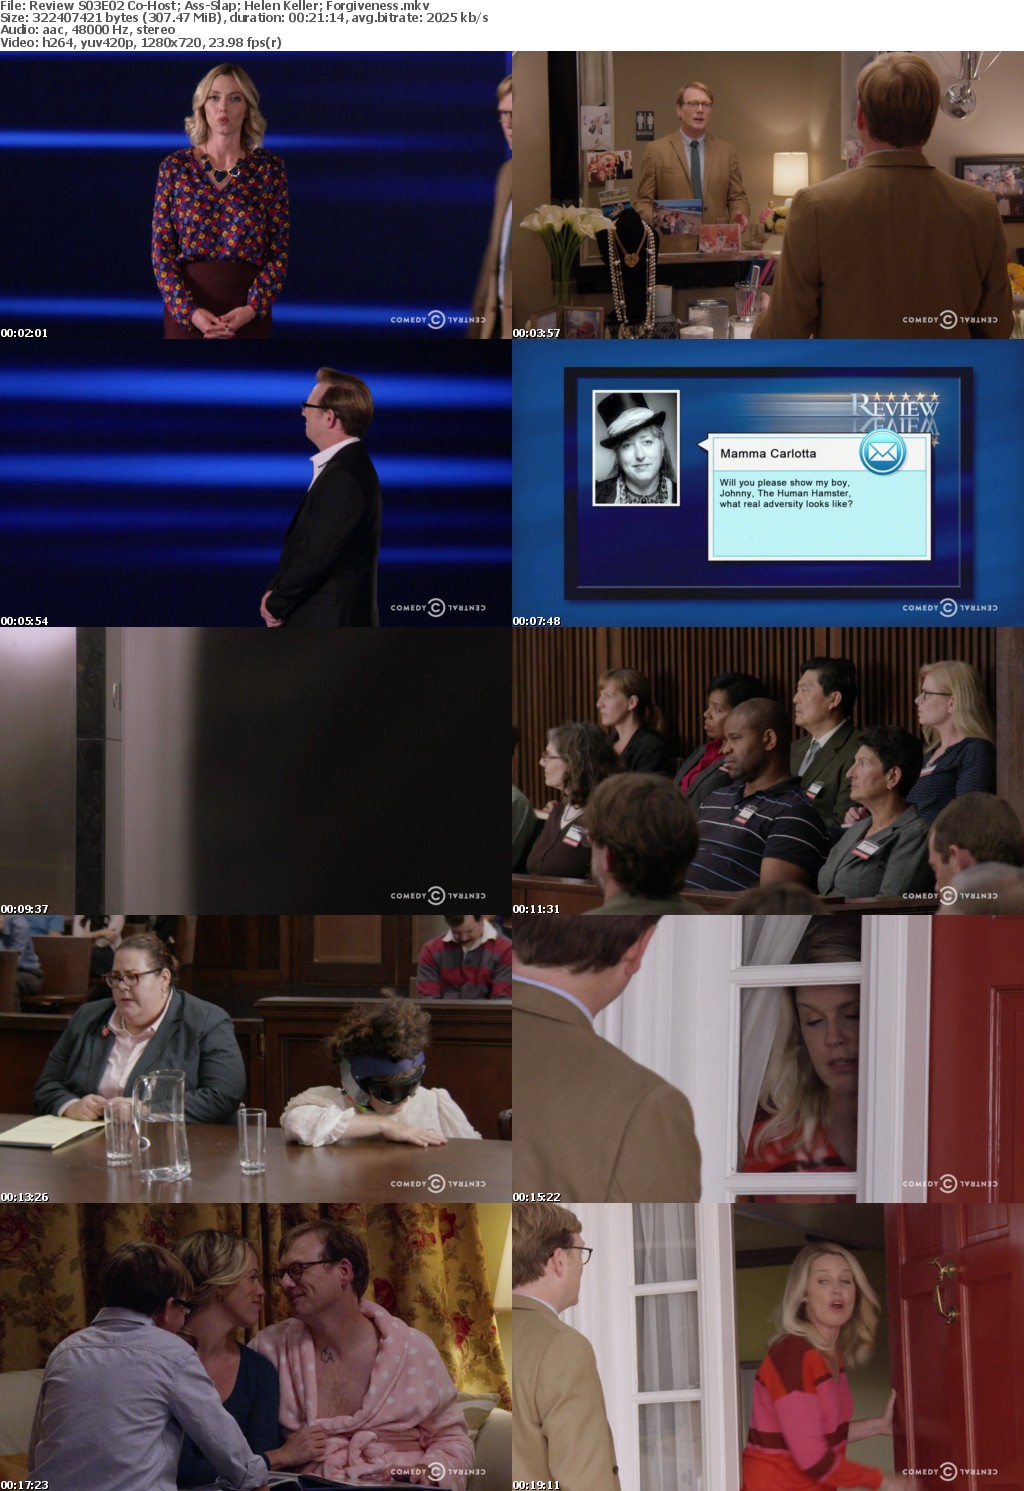 Review with Forrest MacNeil 2014 Season 3 Complete HDTV x264 i c